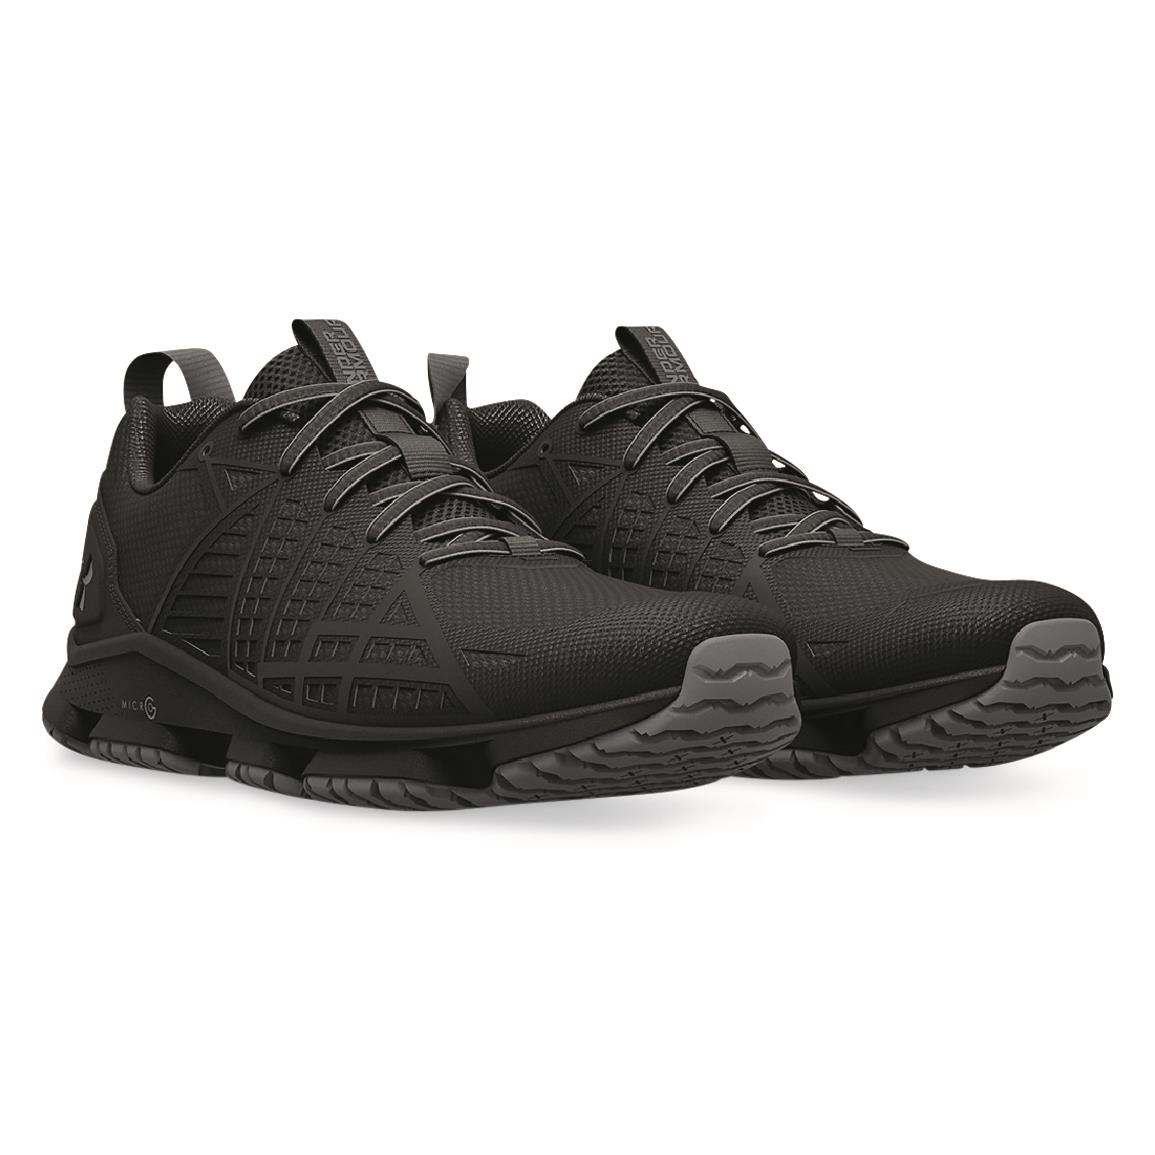 Under Armour Black Lightweight Shoes | Sportsman's Guide